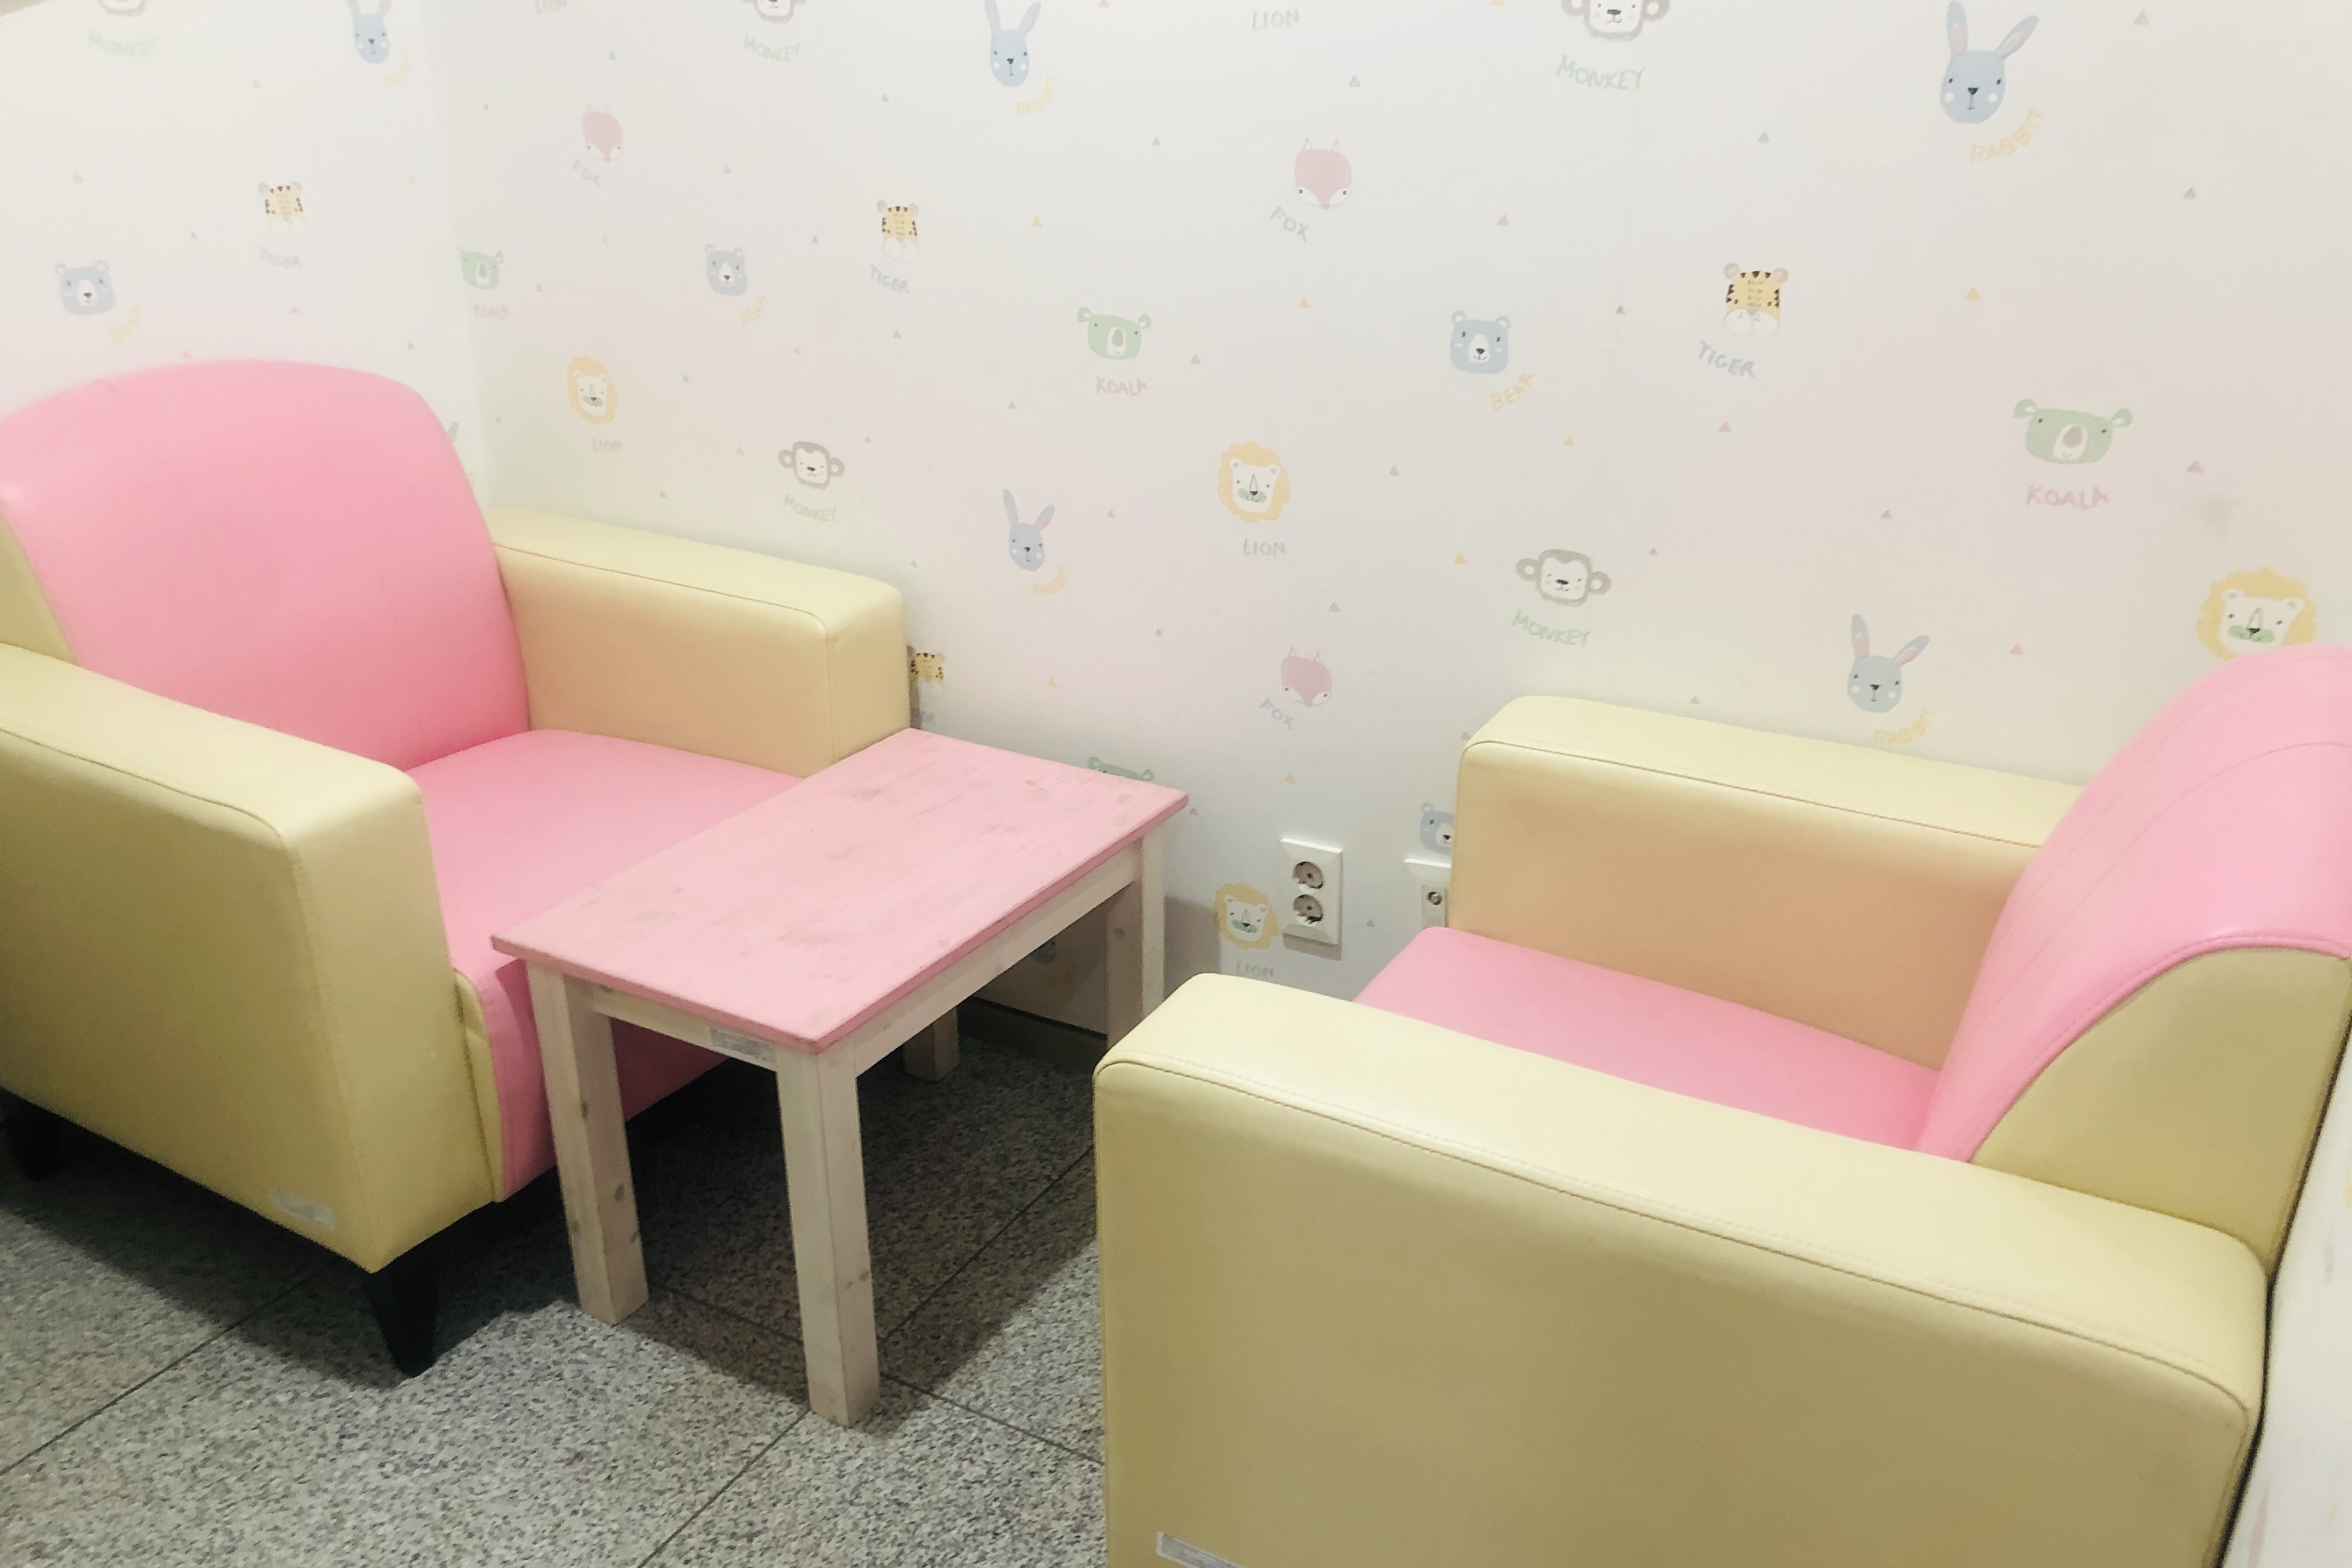 Lounge for families with babies0 : Interior view of the nursing room with a sofa